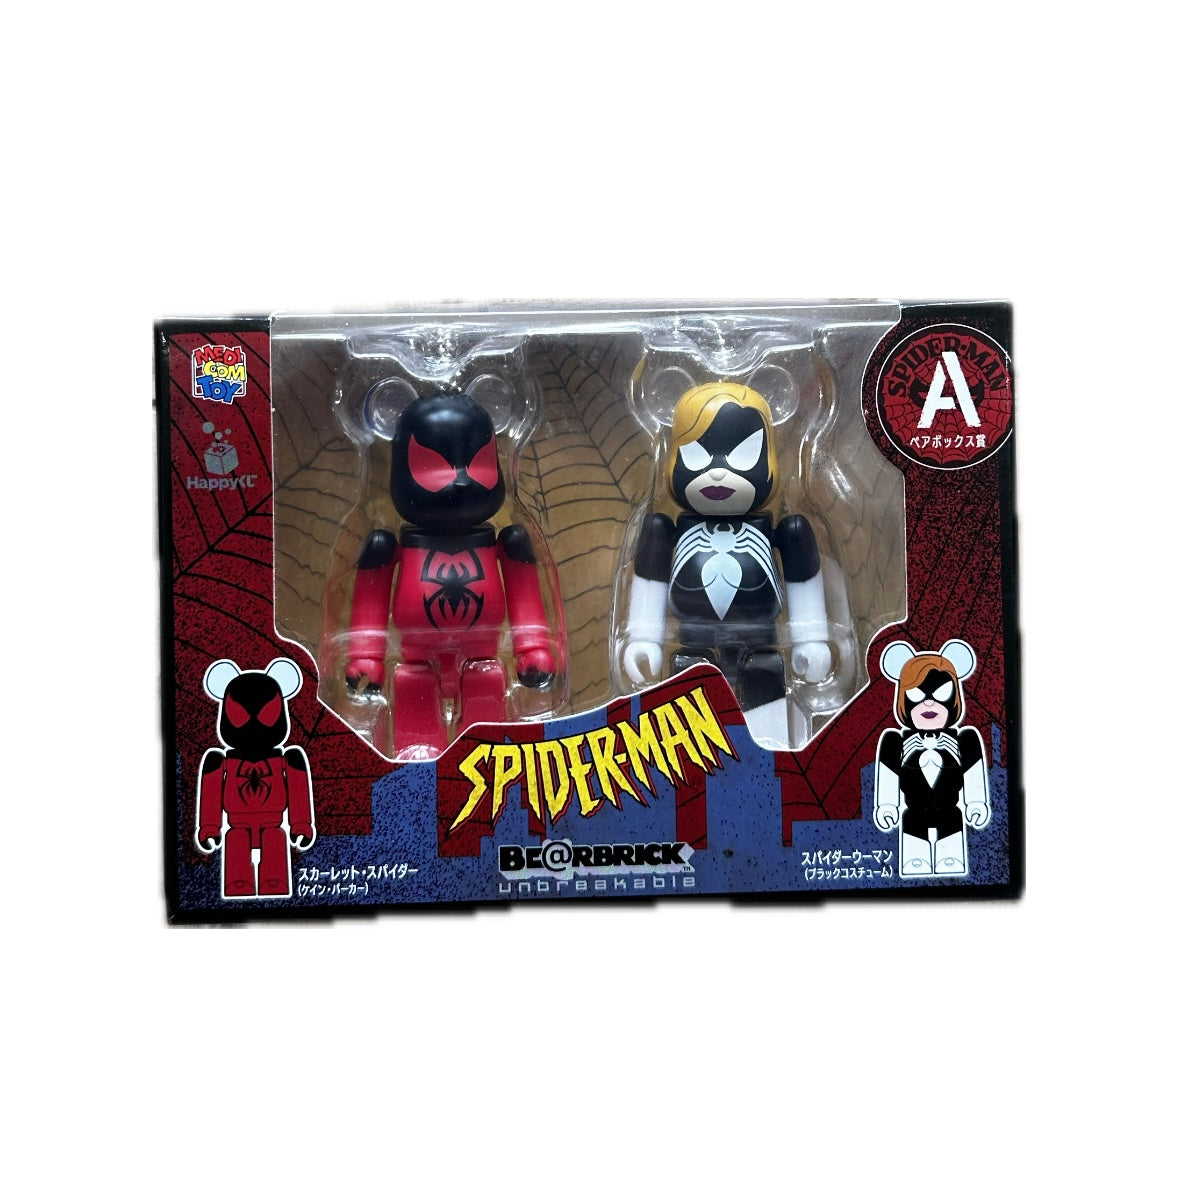 BE@RBRICK UNBREAKABLE 100% SPIDER-MAN SERIES A